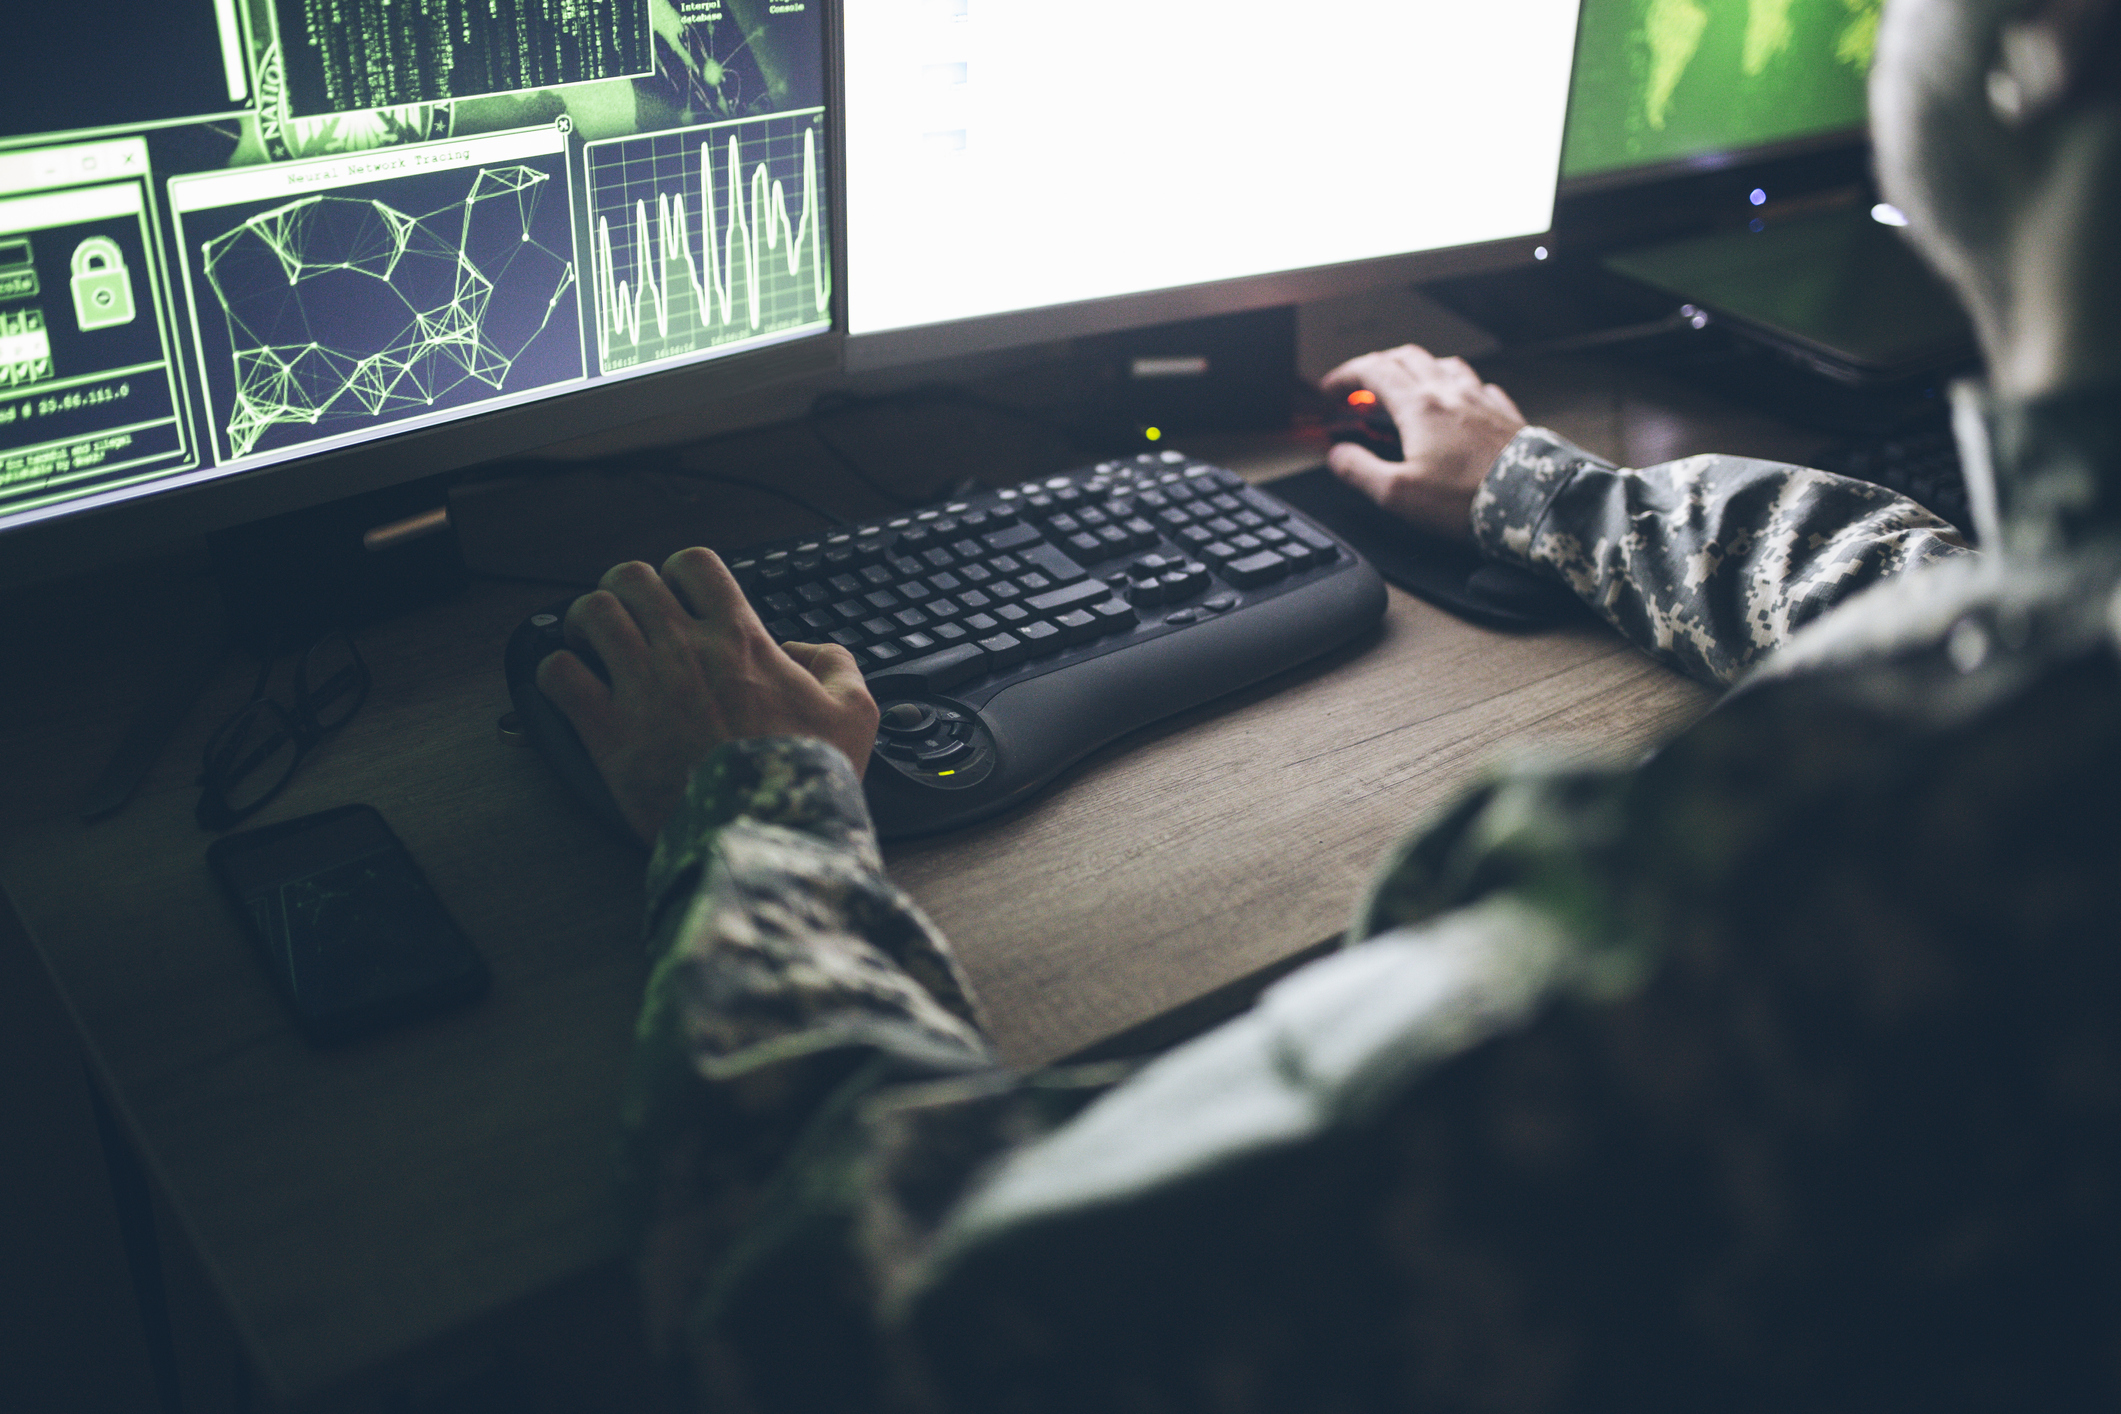 Soldier seated at a computer in a dark room.